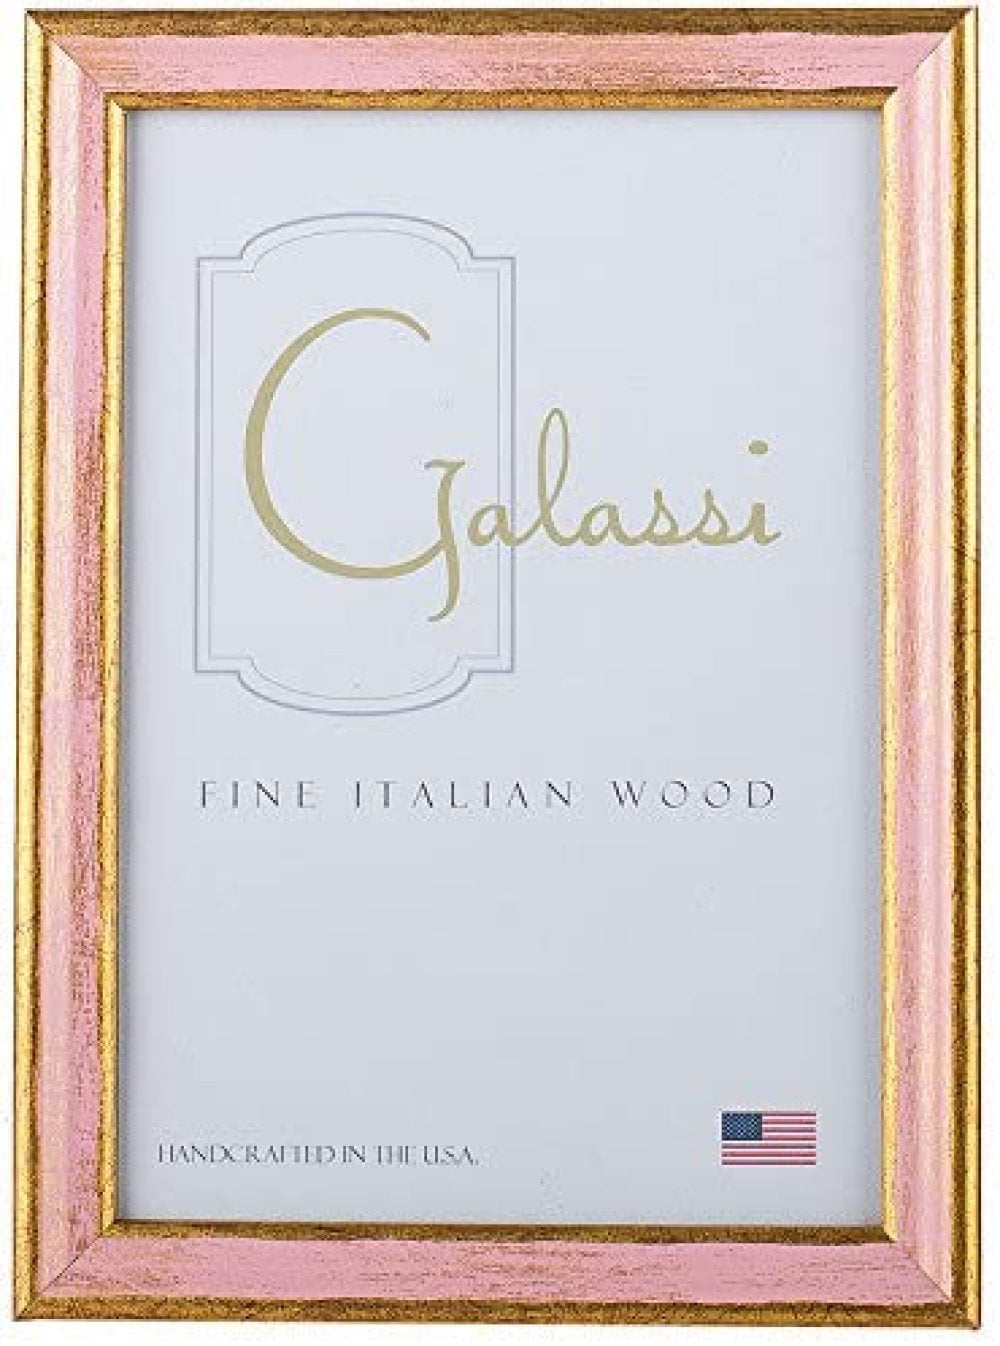 Galassi Handcrafted Fine italian Wood 5x7  Frame  Gold Made USA F.G 